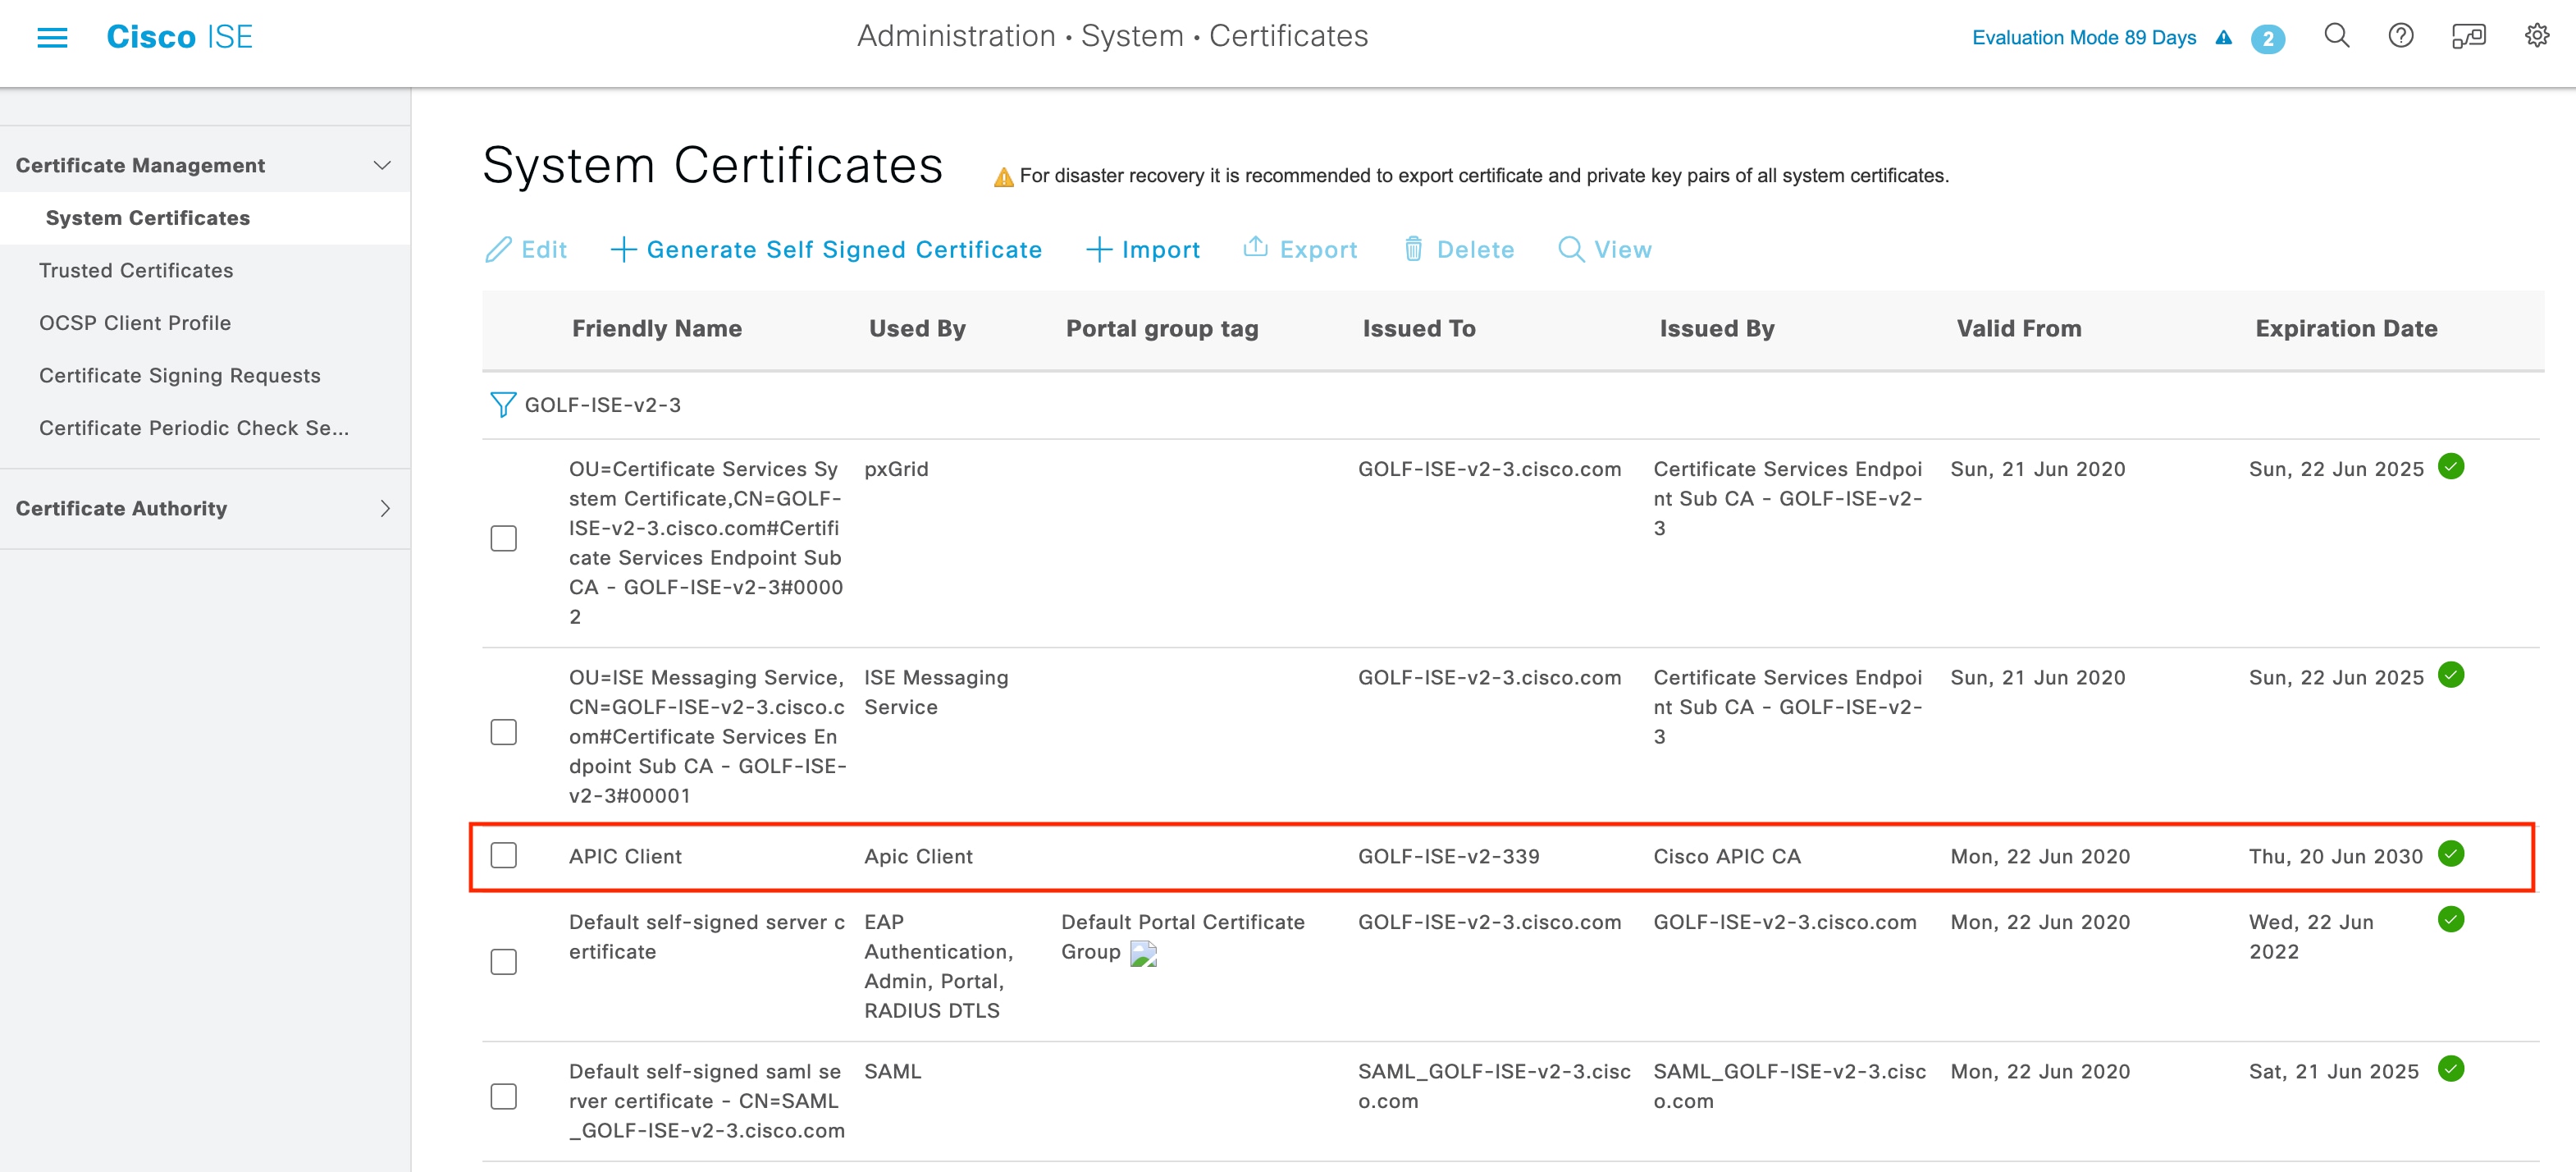 Verify the Certificate in System Certificates window